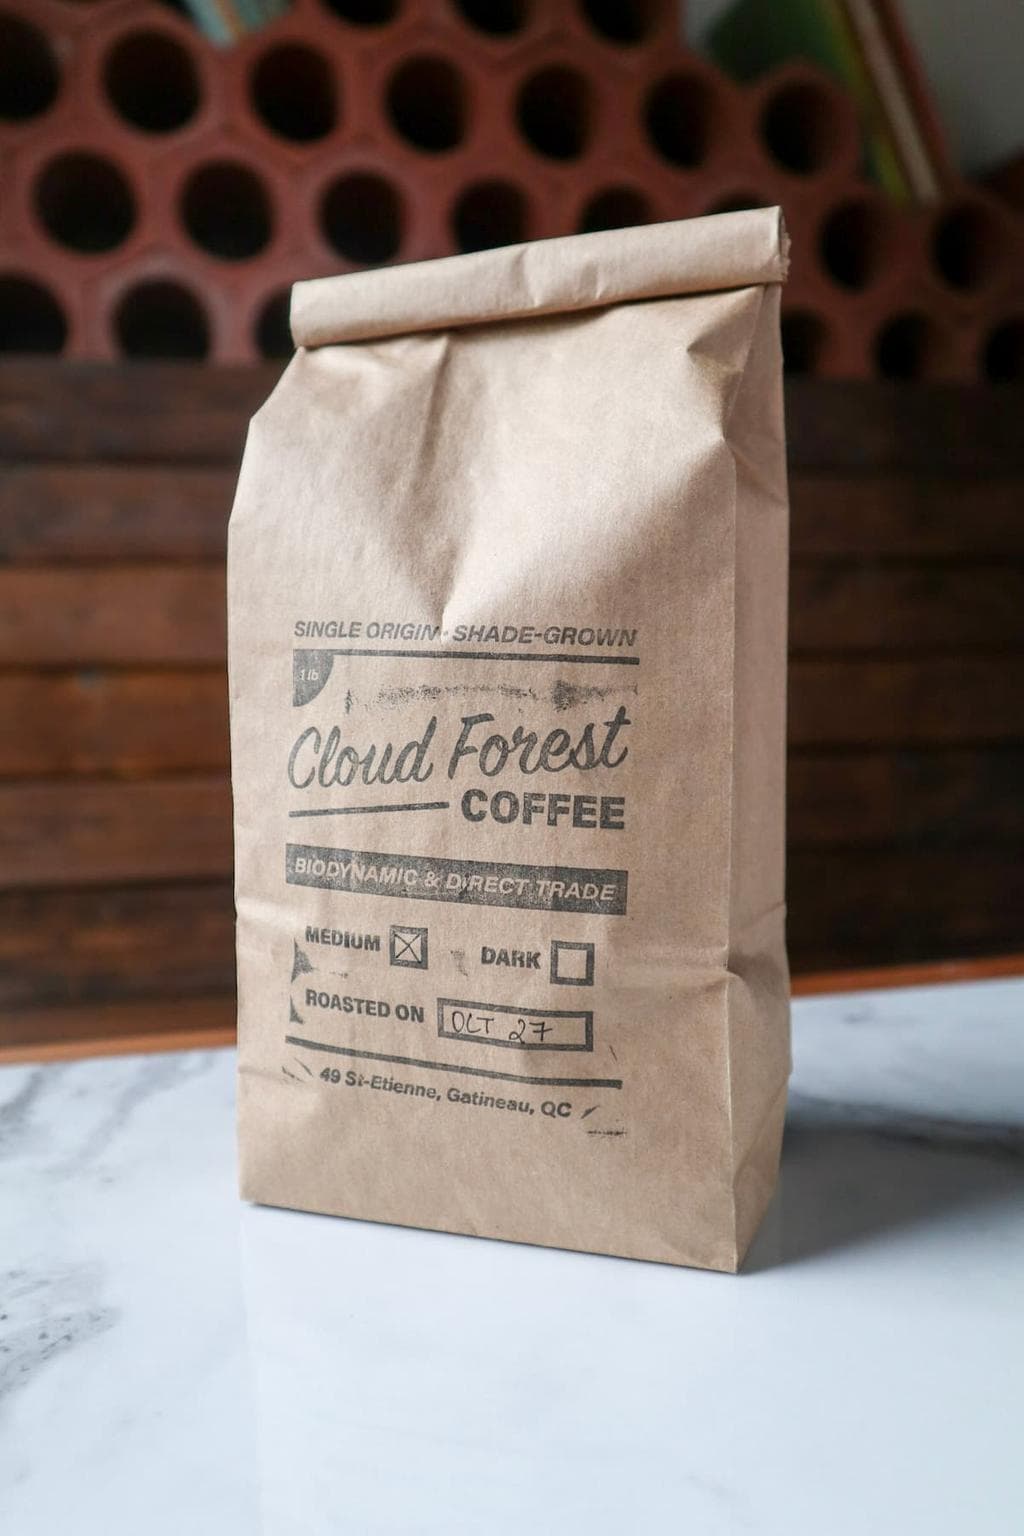 A bag of coffee from Cloud Forest Coffee. Available at Carlington Coffee House in Ottawa.